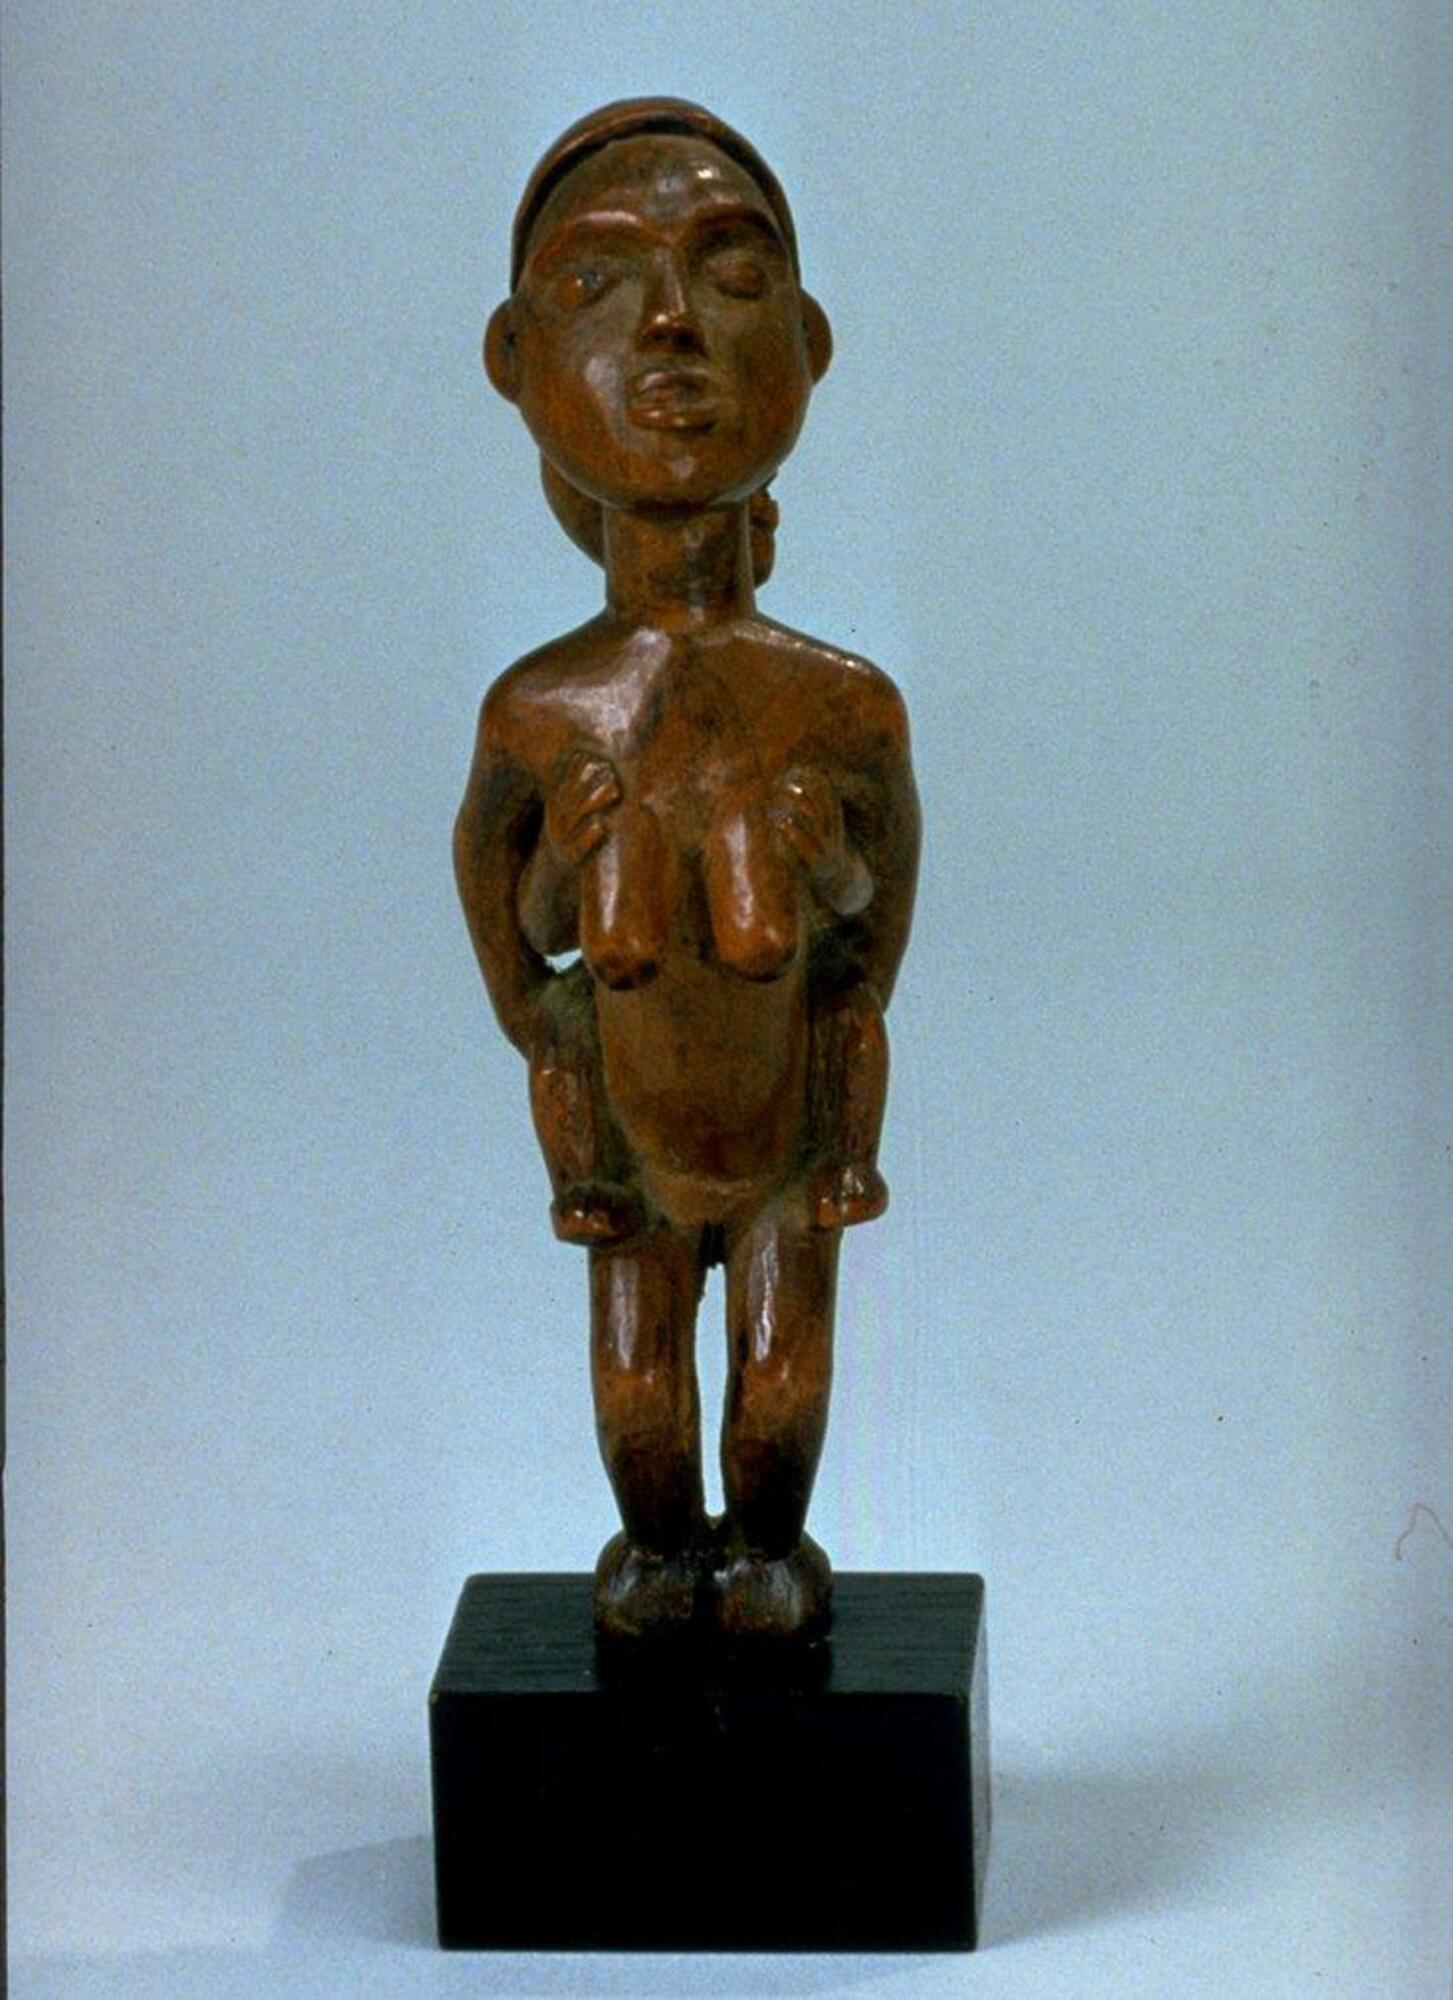 Carved wooden object depicting a female figure with flexed knees carrying a child on her back.